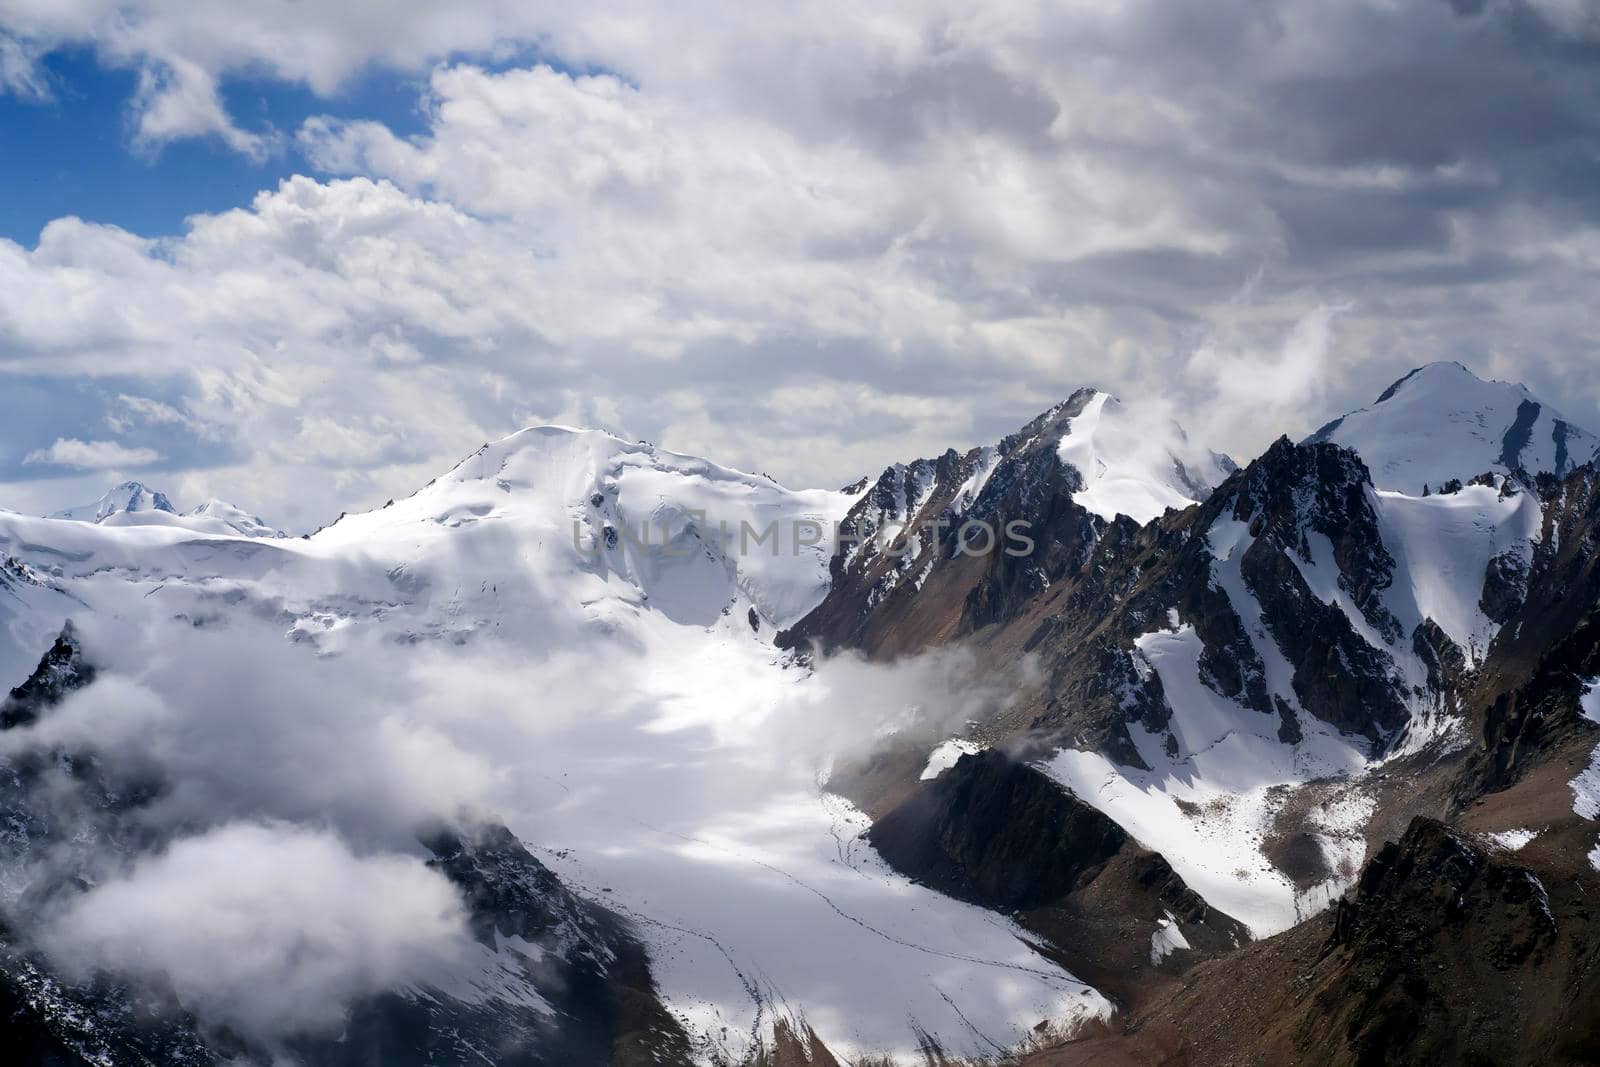 Stunning majestic landscape with snow-capped mountains and glaciers among the clouds on a sunny day.